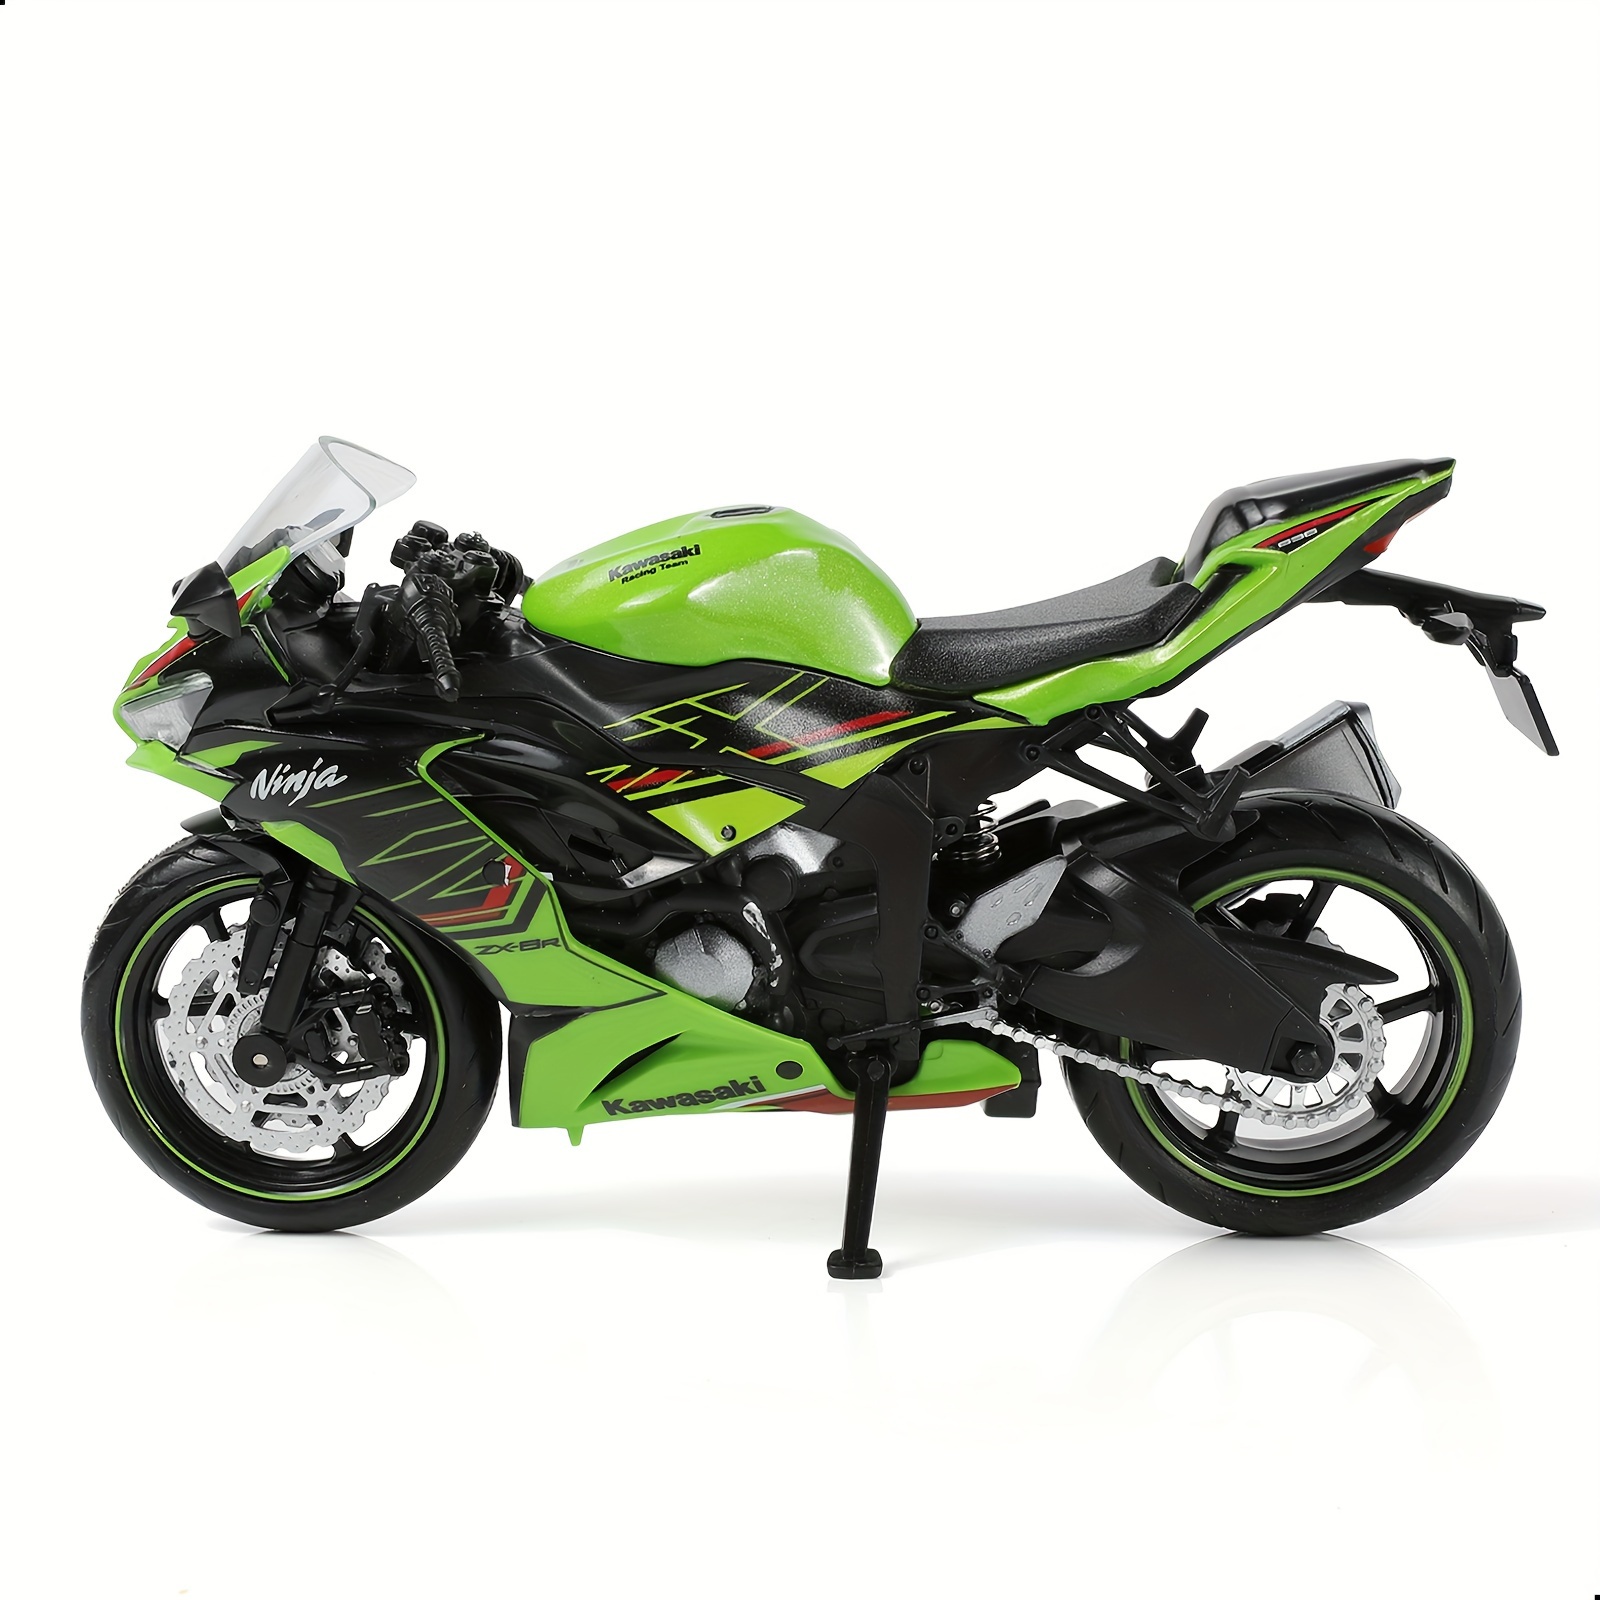 

Kawasaki Ninja Zx-6r Diecast Metal Motorcycle Model Toy, 1:12 Scale Pre-built Collectible, Kid-friendly Ages 3-6 Years, Durable Metal Materials, Makeda Moto Gift.